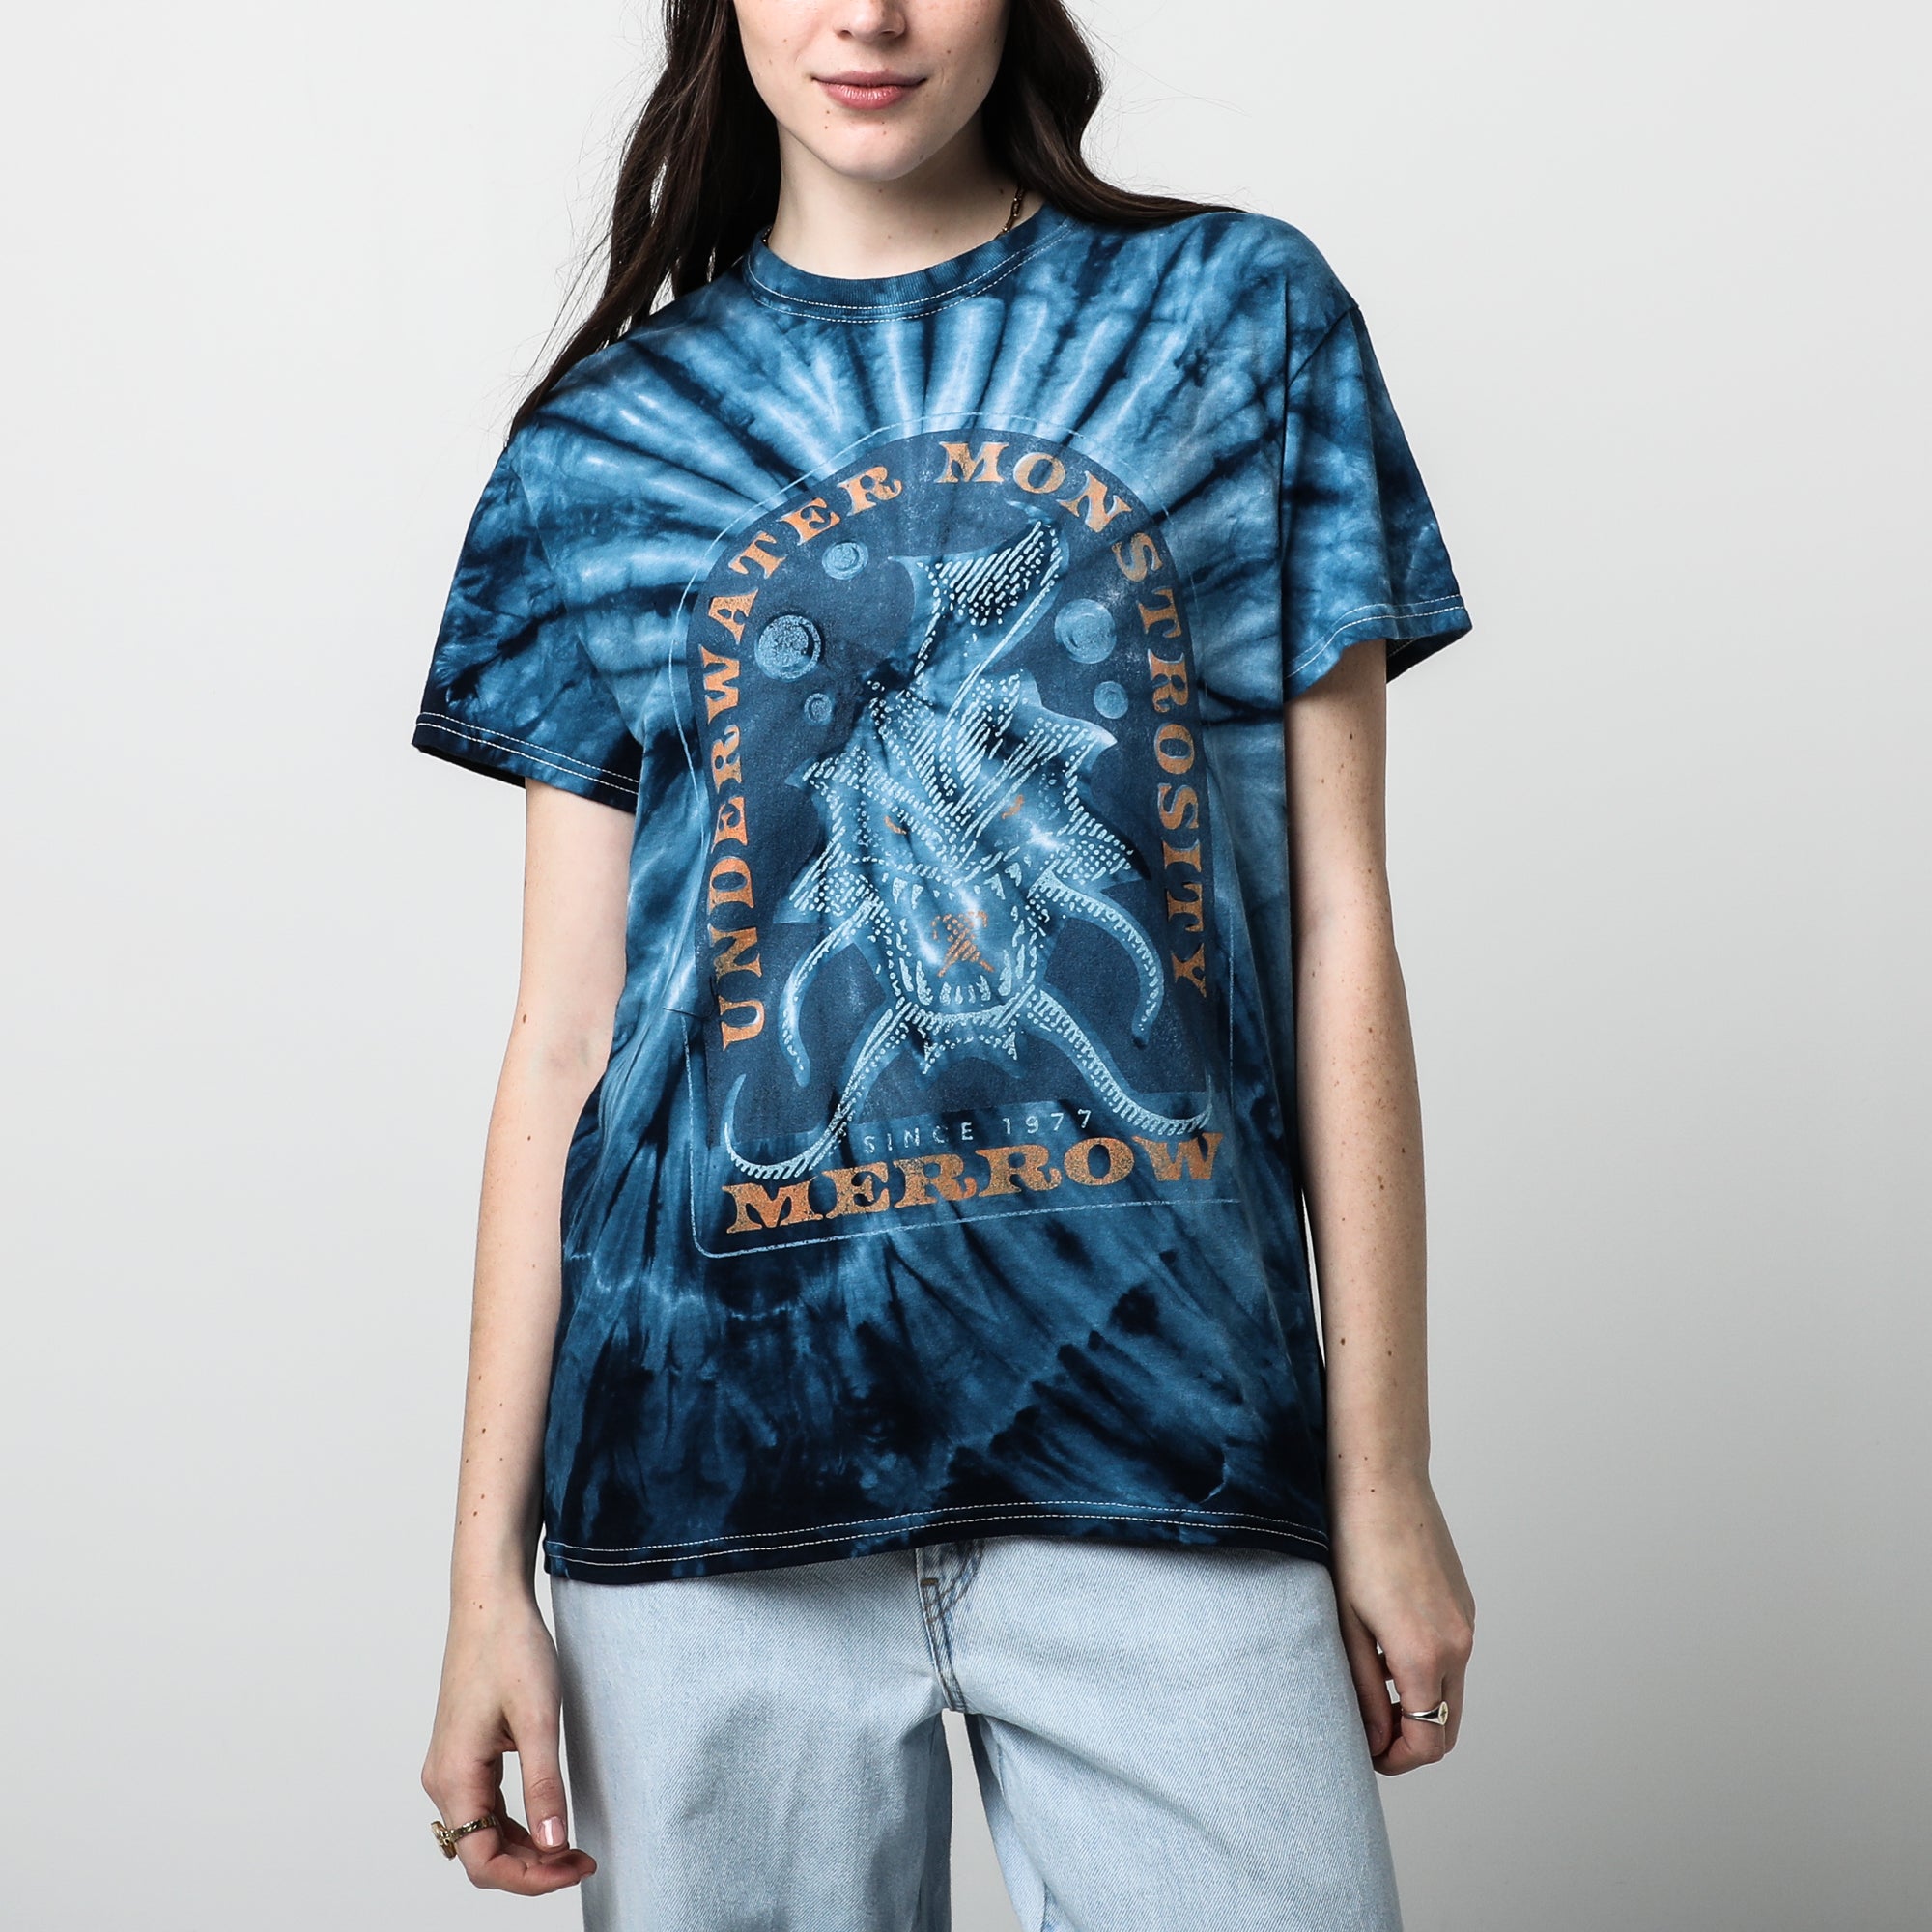 Dragons Dragons: And Villains™ Official Accessories Dye Tie Tee Underwater - Merrow | Heroes & | & Dungeons Apparel Dungeons &